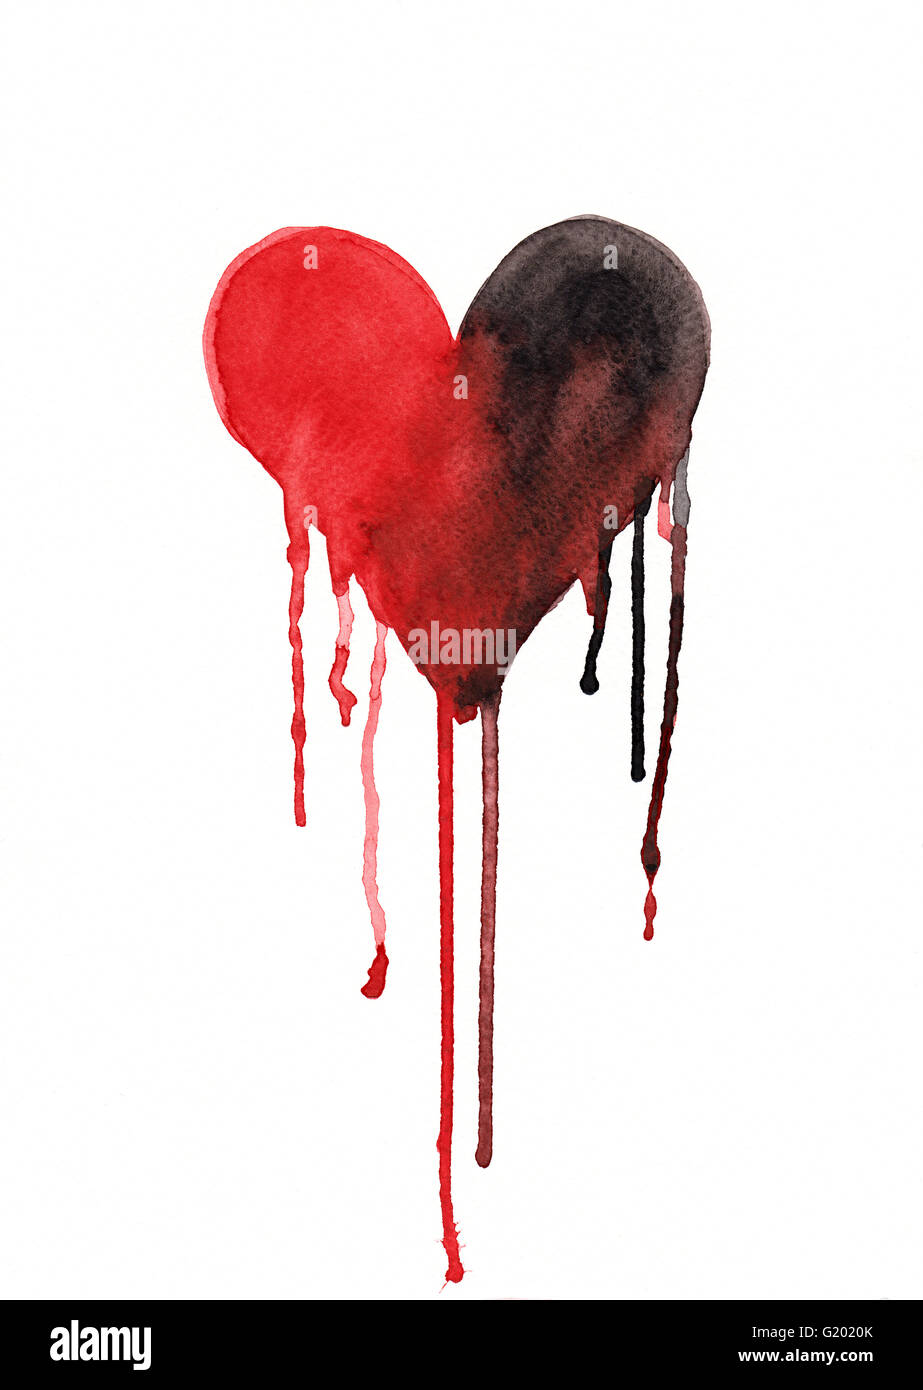 Melting or crying heart watercolor painting Stock Photo - Alamy